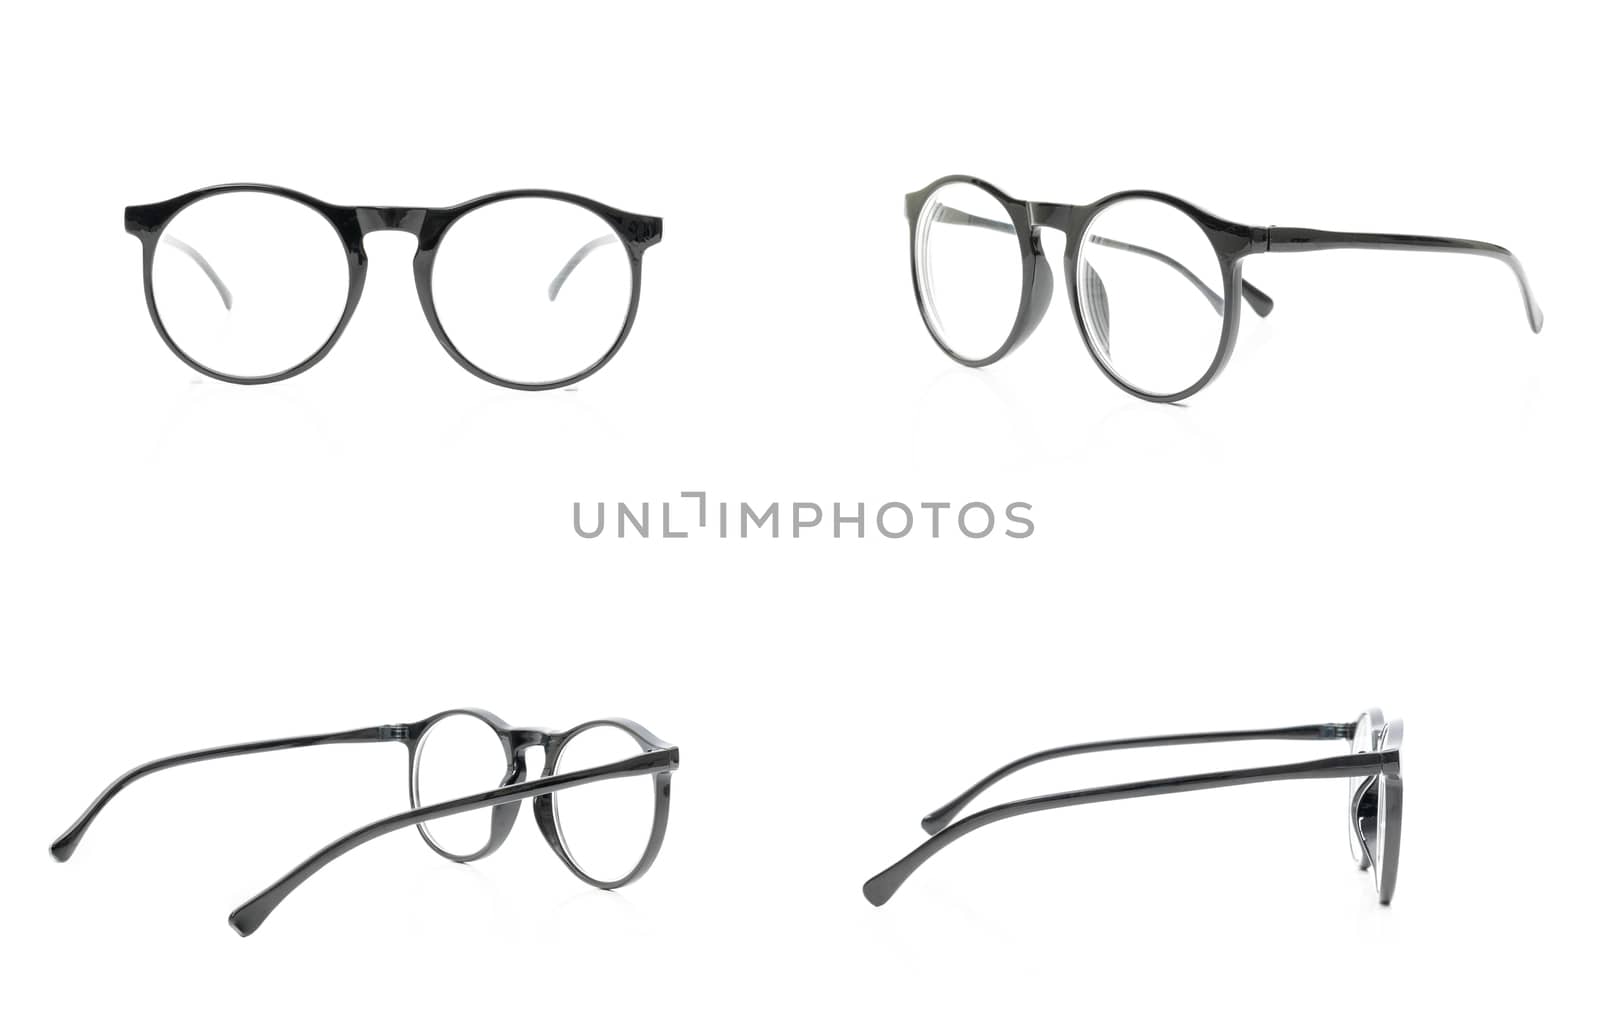 Collection Glasses black on white background by sompongtom